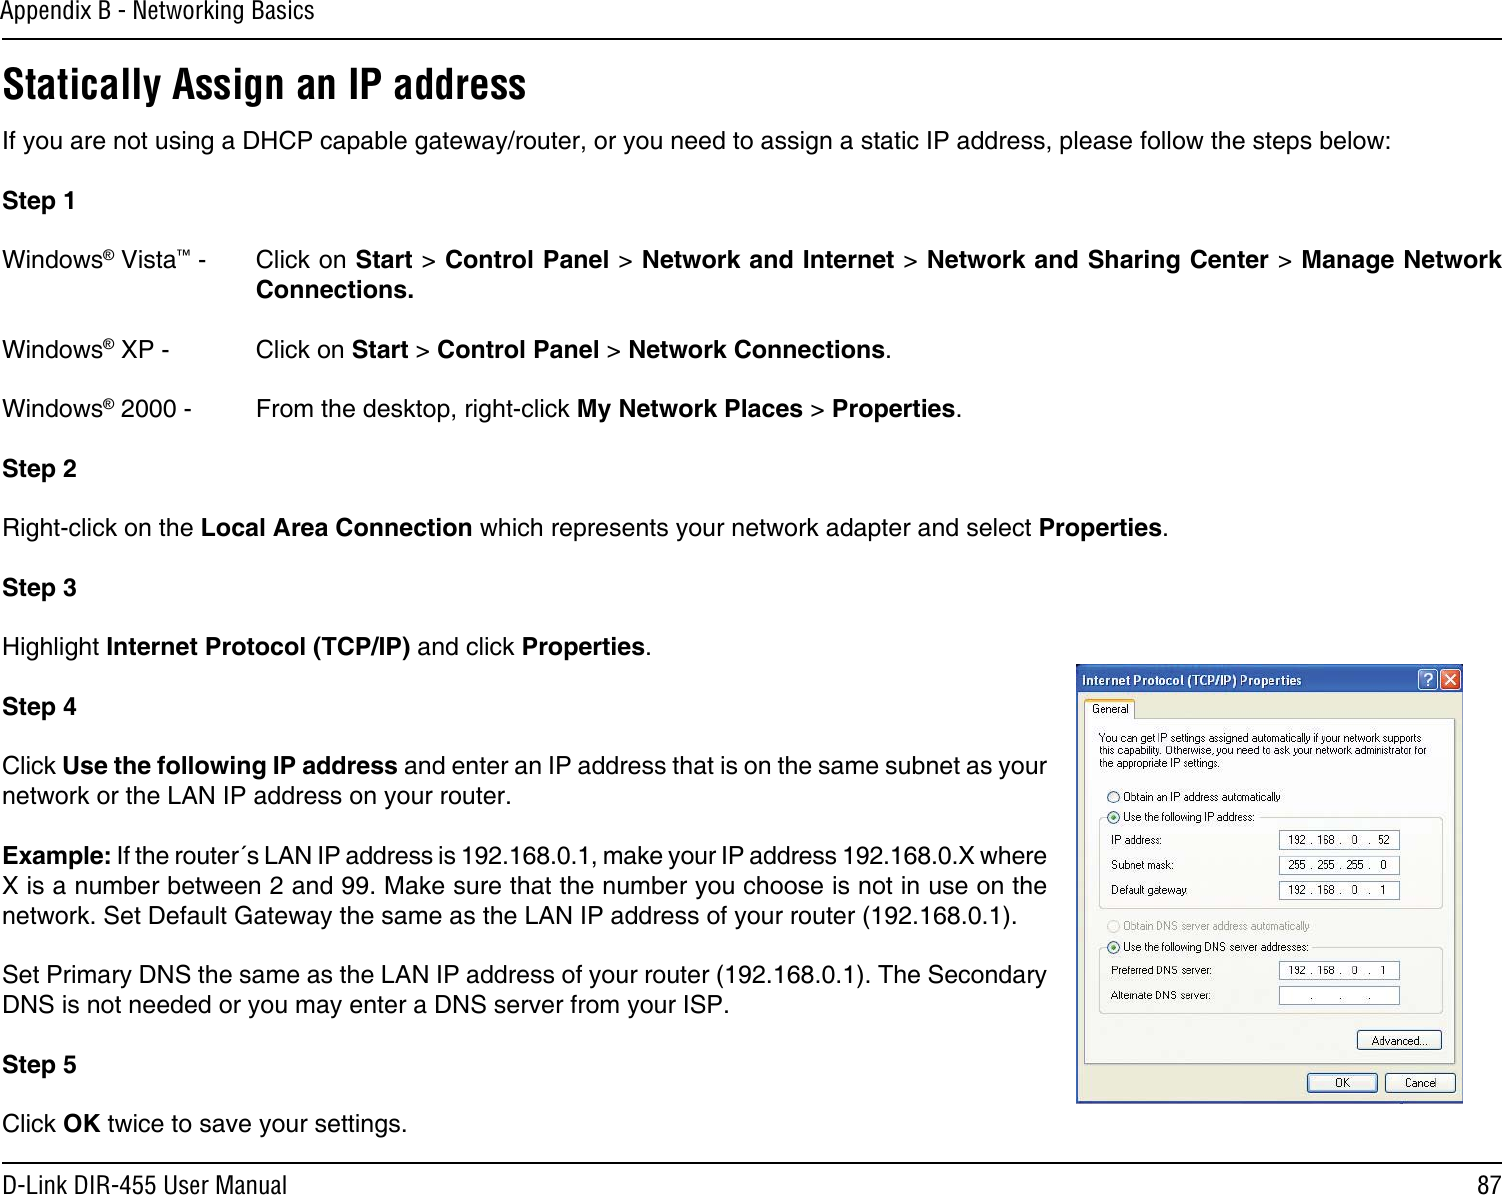 87D-Link DIR-455 User ManualAppendix B - Networking BasicsStatically Assign an IP addressIf you are not using a DHCP capable gateway/router, or you need to assign a static IP address, please follow the steps below:Step 1Windows® Vista™ -  Click on Start &gt; Control Panel &gt; Network and Internet &gt; Network and Sharing Center &gt; Manage Network Connections.Windows® XP -  Click on Start &gt; Control Panel &gt; Network Connections.Windows® 2000 -  From the desktop, right-click My Network Places &gt; Properties.Step 2Right-click on the Local Area Connection which represents your network adapter and select Properties.Step 3Highlight Internet Protocol (TCP/IP) and click Properties.Step 4Click Use the following IP address and enter an IP address that is on the same subnet as your network or the LAN IP address on your router. Example: If the router´s LAN IP address is 192.168.0.1, make your IP address 192.168.0.X where X is a number between 2 and 99. Make sure that the number you choose is not in use on the network. Set Default Gateway the same as the LAN IP address of your router (192.168.0.1). Set Primary DNS the same as the LAN IP address of your router (192.168.0.1). The Secondary DNS is not needed or you may enter a DNS server from your ISP.Step 5Click OK twice to save your settings.